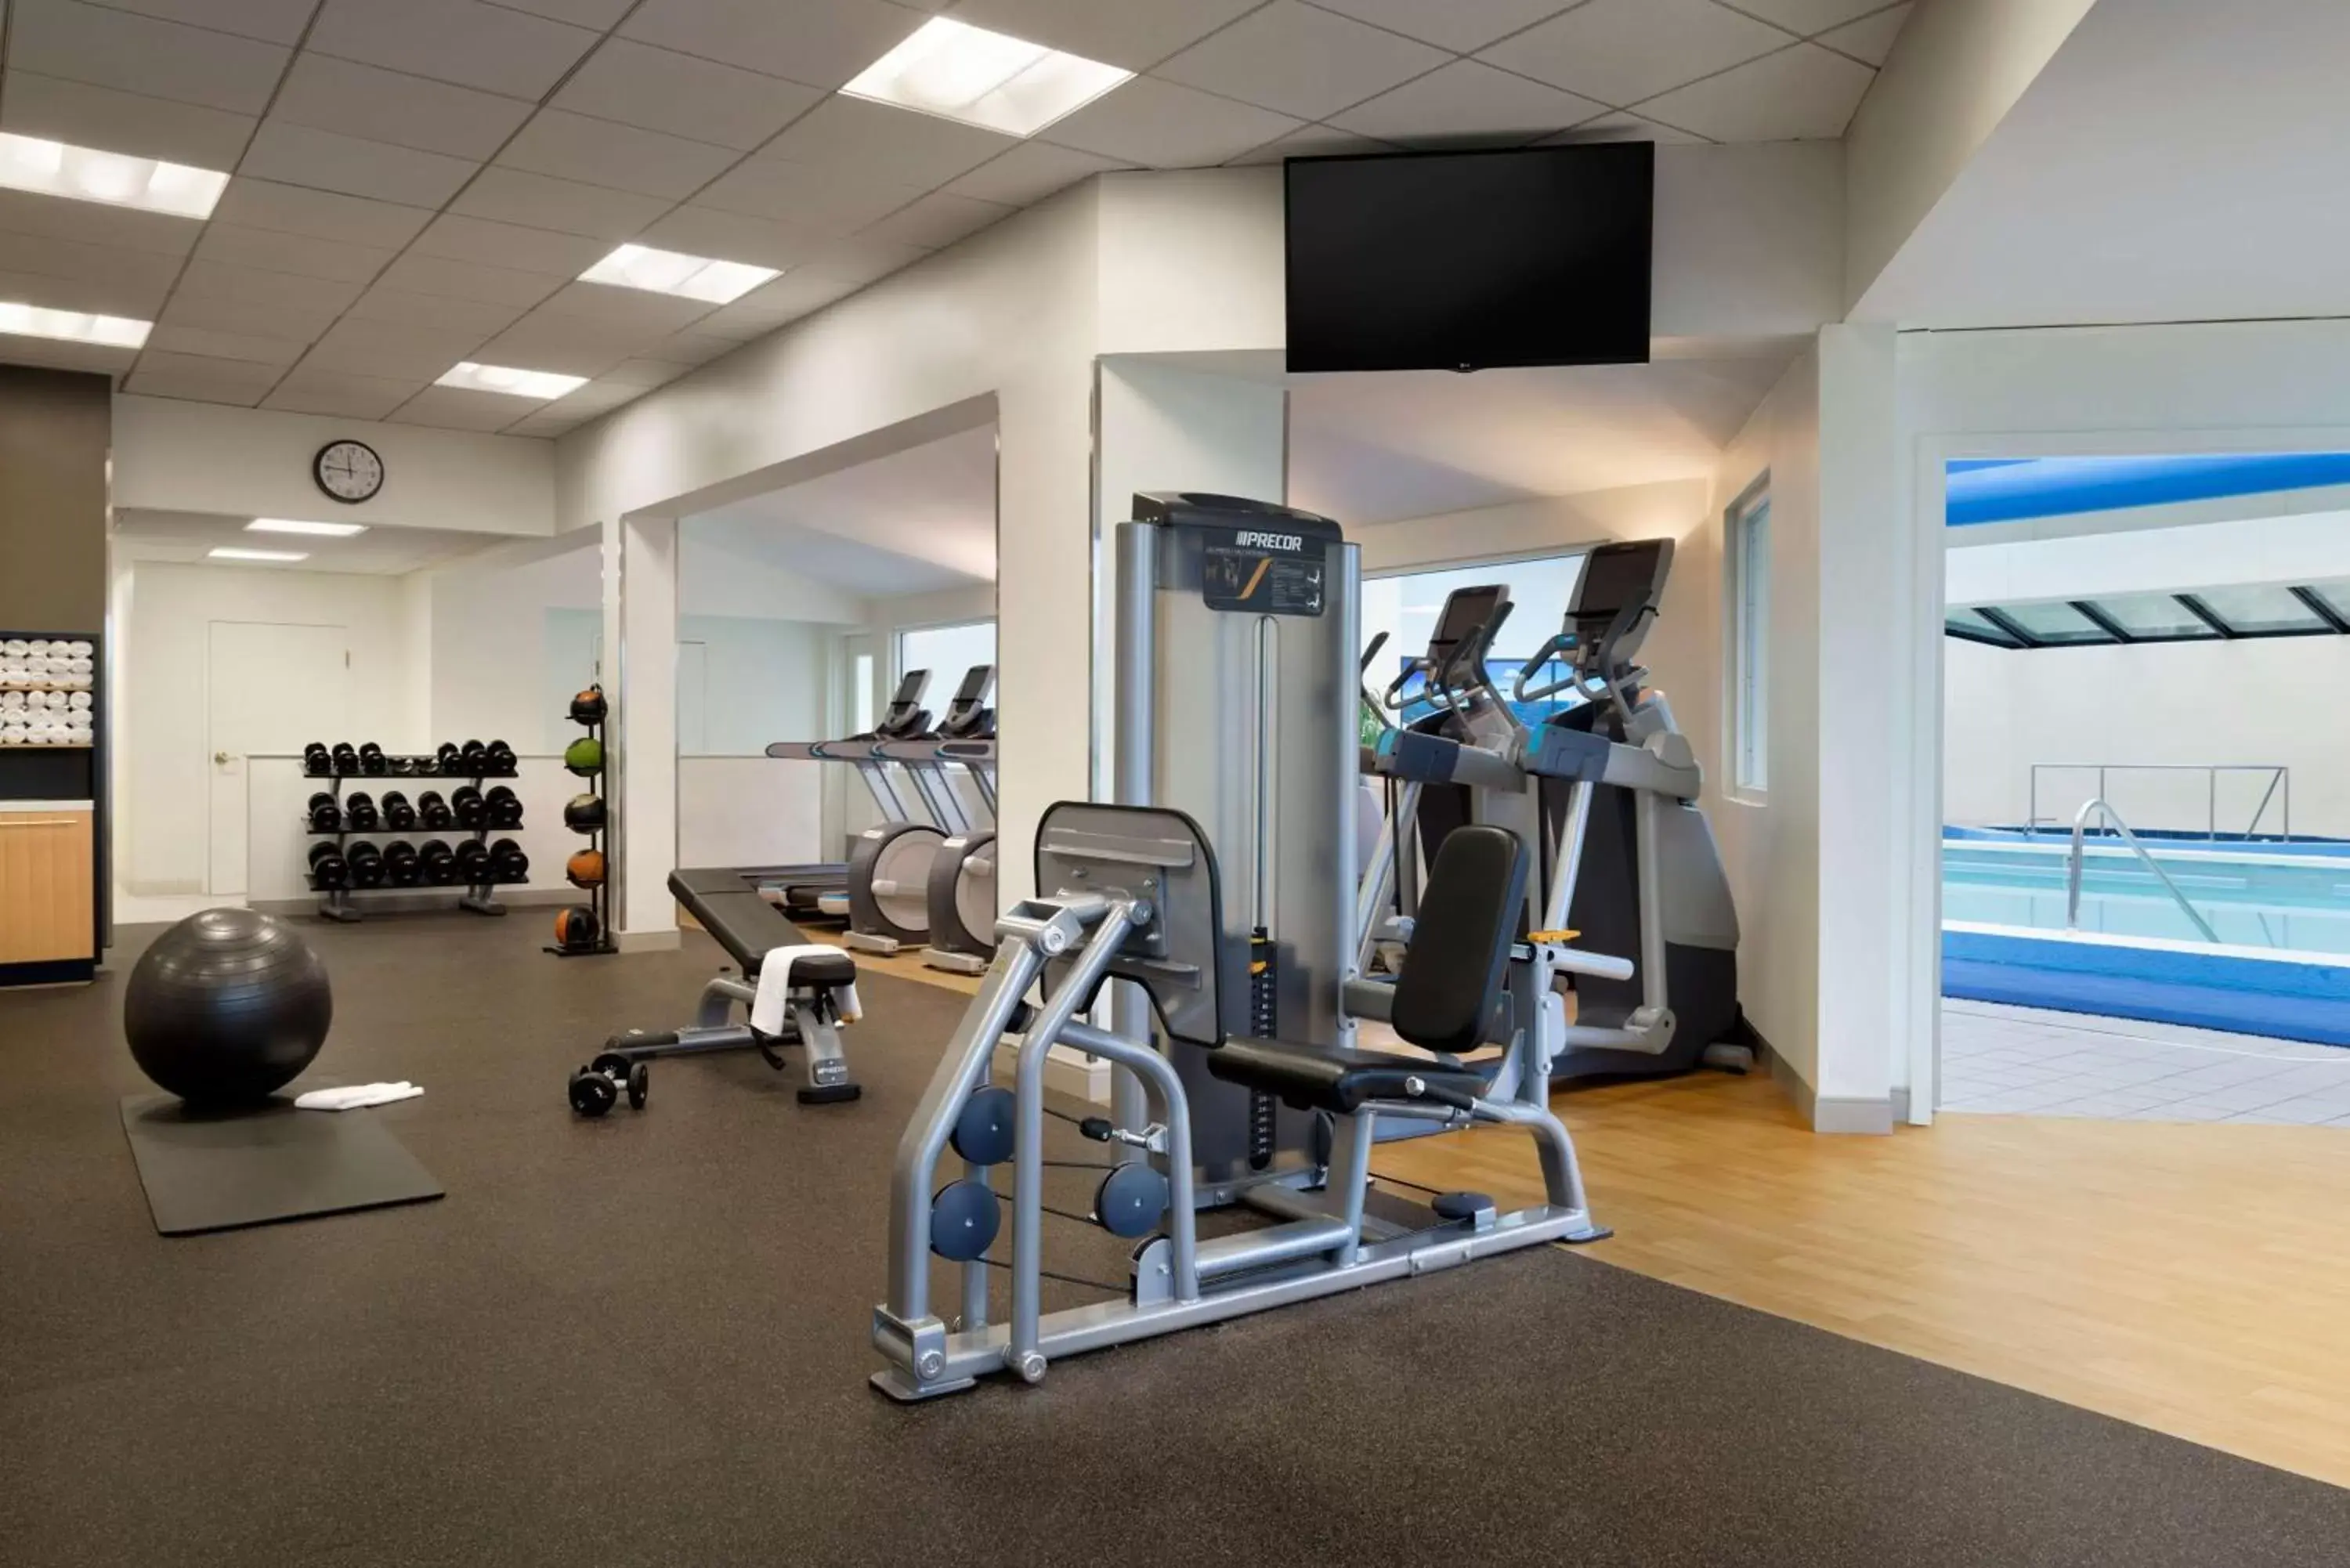 Fitness centre/facilities, Fitness Center/Facilities in Hilton Stamford Hotel & Executive Meeting Center